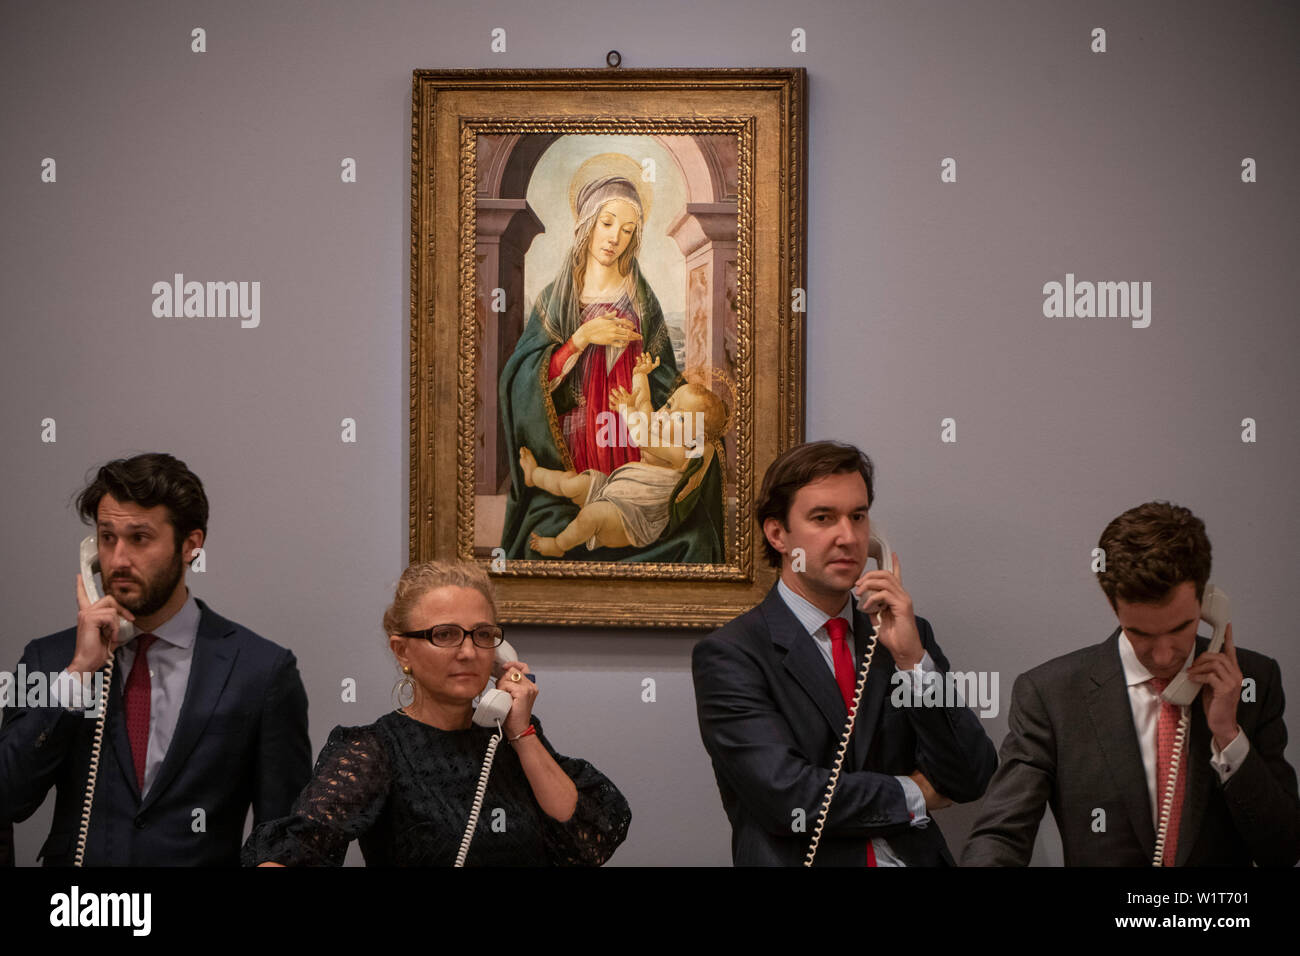 Sotheby’s, London, UK. 3rd July 2019. The summer Old Masters Evening sale offers paintings from the 14th - 19th century by many of the most important painters of Western art. Highlights include a masterpiece by each of Britain’s greatest landscape painters - Turner, Constable and Gainsborough - and extraordinary works from the Baroque by Ribera and the exceptionally rare Johann Liss. Image: Alessandro di Mariano Filipepi, called Sandro Boticelli and Studio, Madonna and Child, sells for £3,015,000. Credit: Malcolm Park/Alamy Live News. Stock Photo